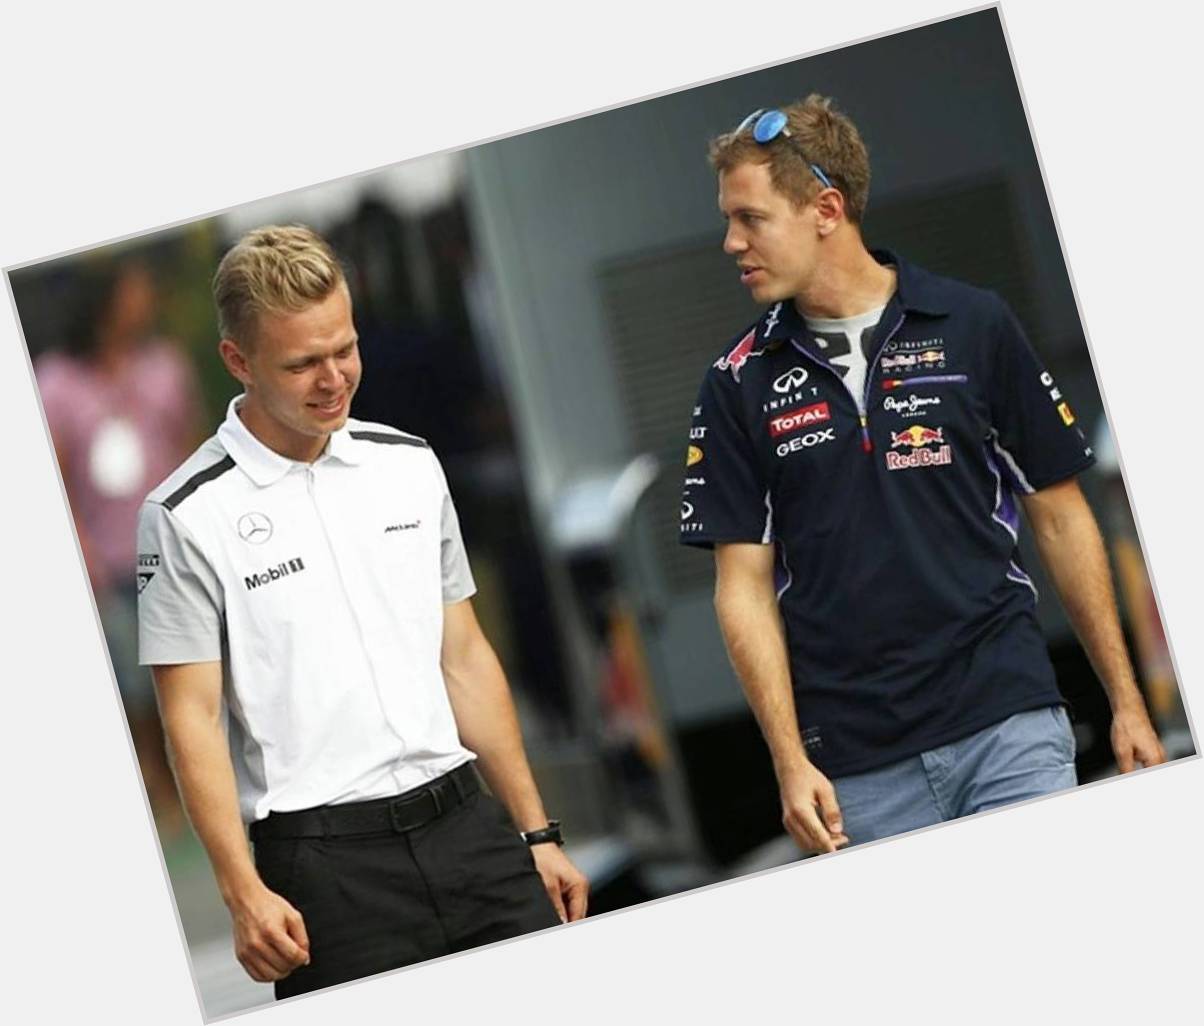 Happy Birthday to Kevin Magnussen, who turns 23 today!
__________

Pic: Kevin Magnussen and Sebastian Vettel, Hunga 